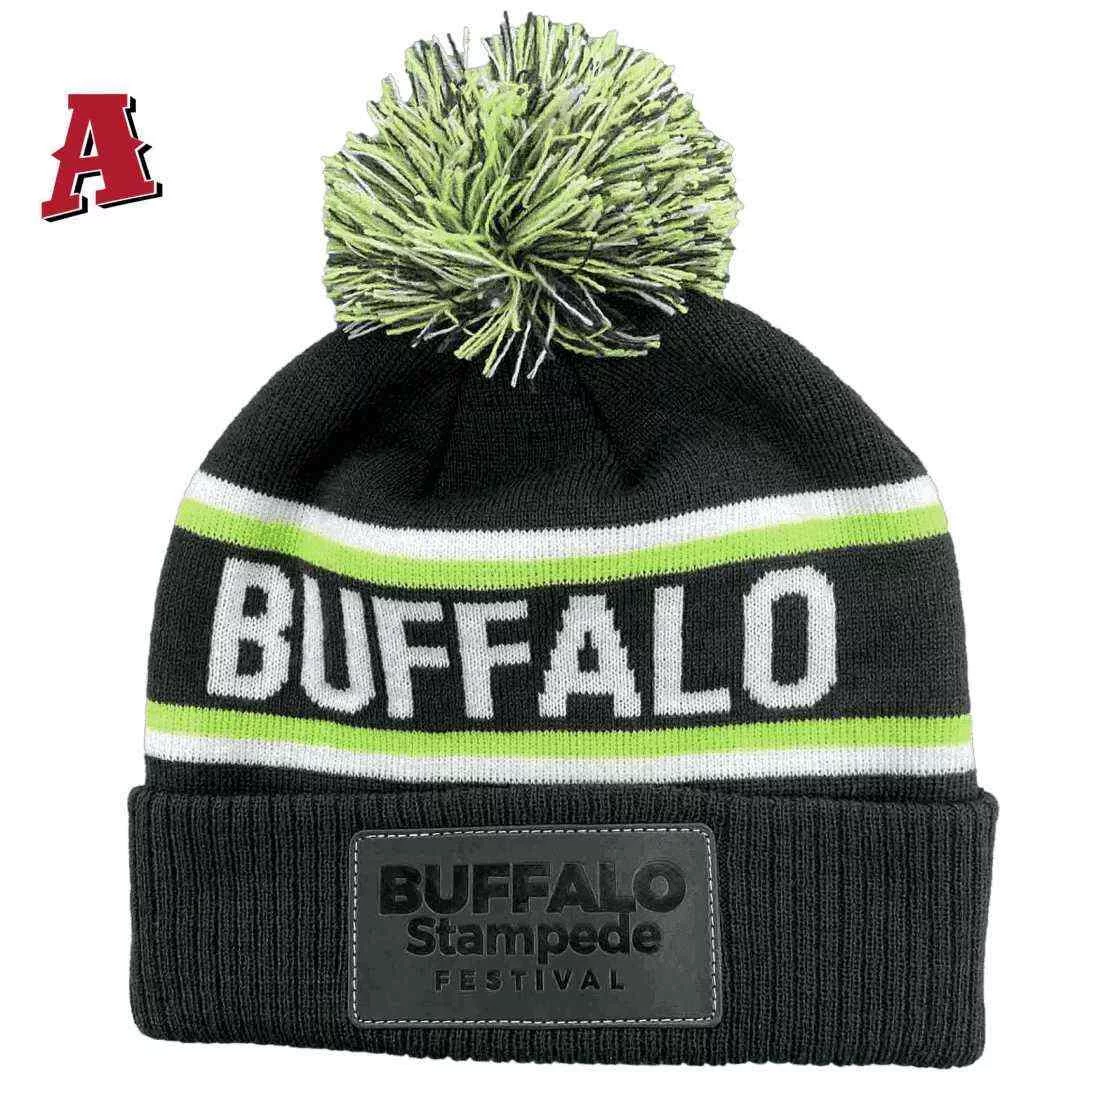 Buffalo Stampede Festival Bright VIC Aussie Trucker Hats Beanie with Acrylic Roll-up Cuff with Pom Pom One Size Fits All Black White Lime